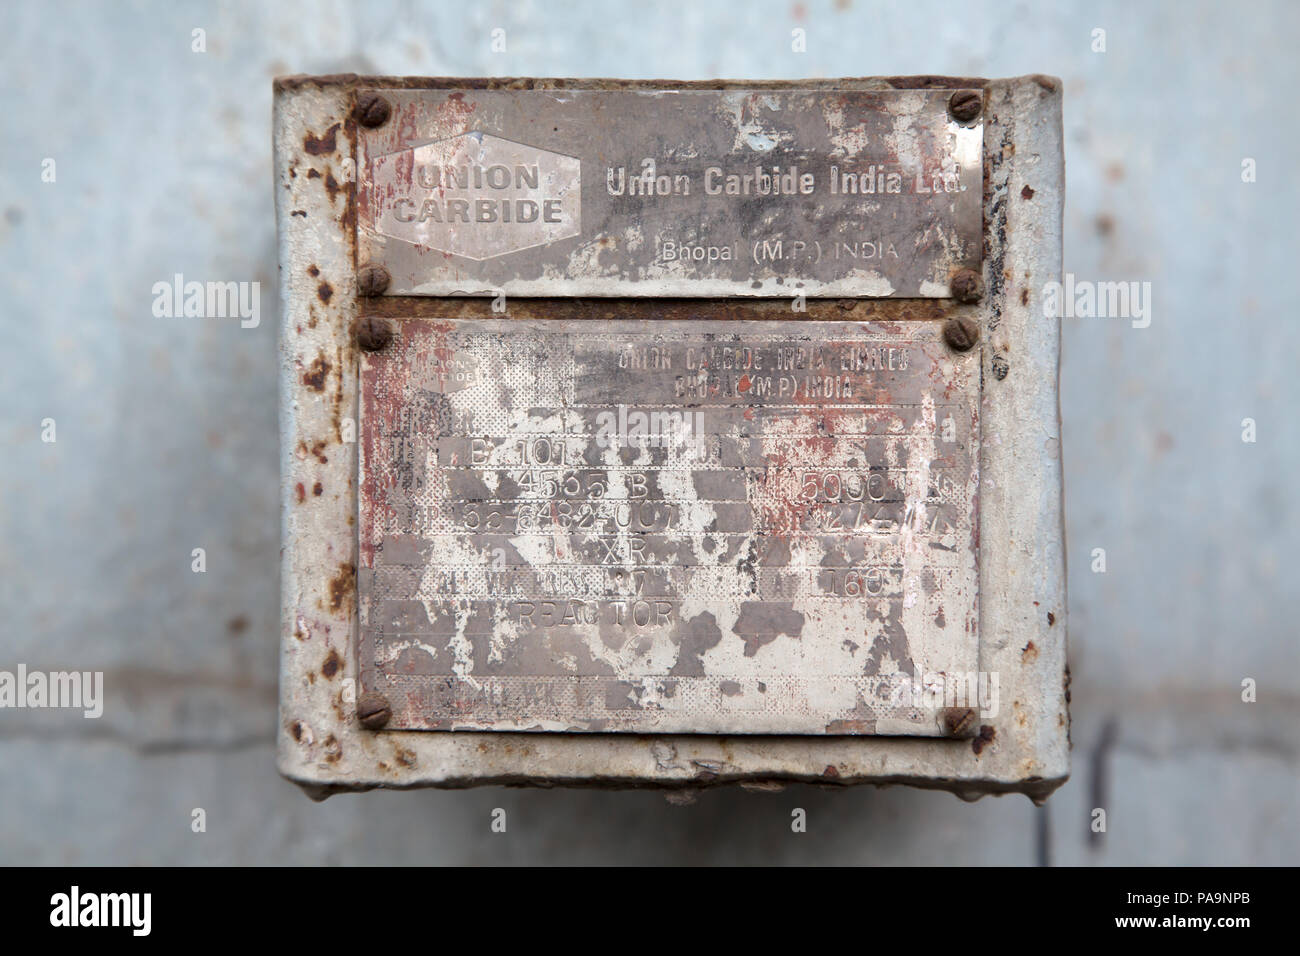 Authentic wall plate with writings inside the abandoned former Union Carbide industrial complex, Bhopal, India Stock Photo